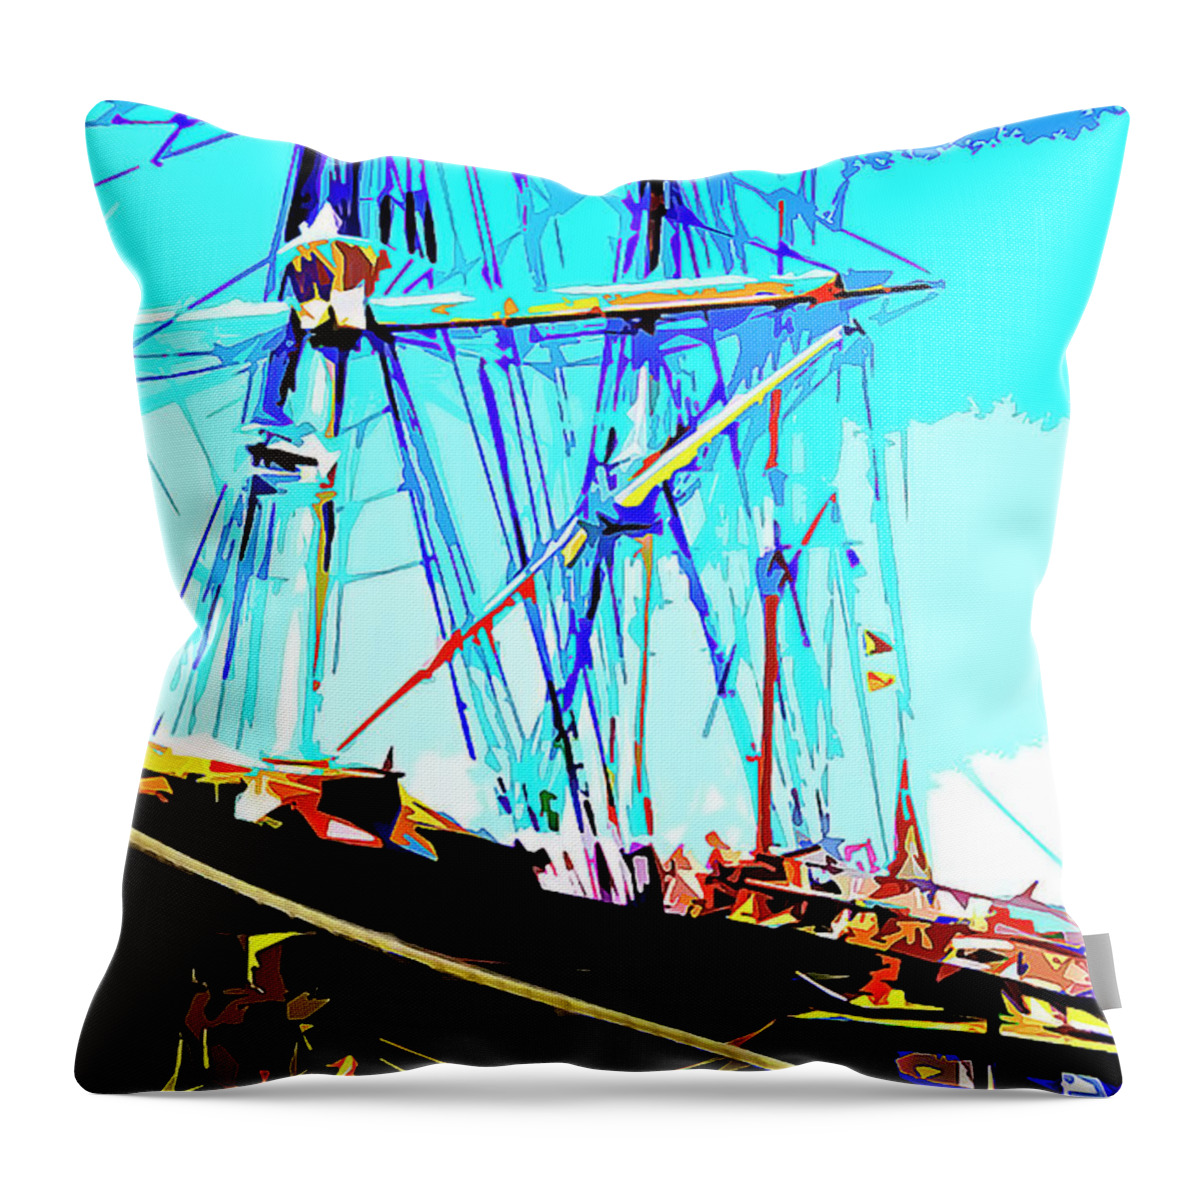 Boats Throw Pillow featuring the painting Tall Ship At Dock by CHAZ Daugherty